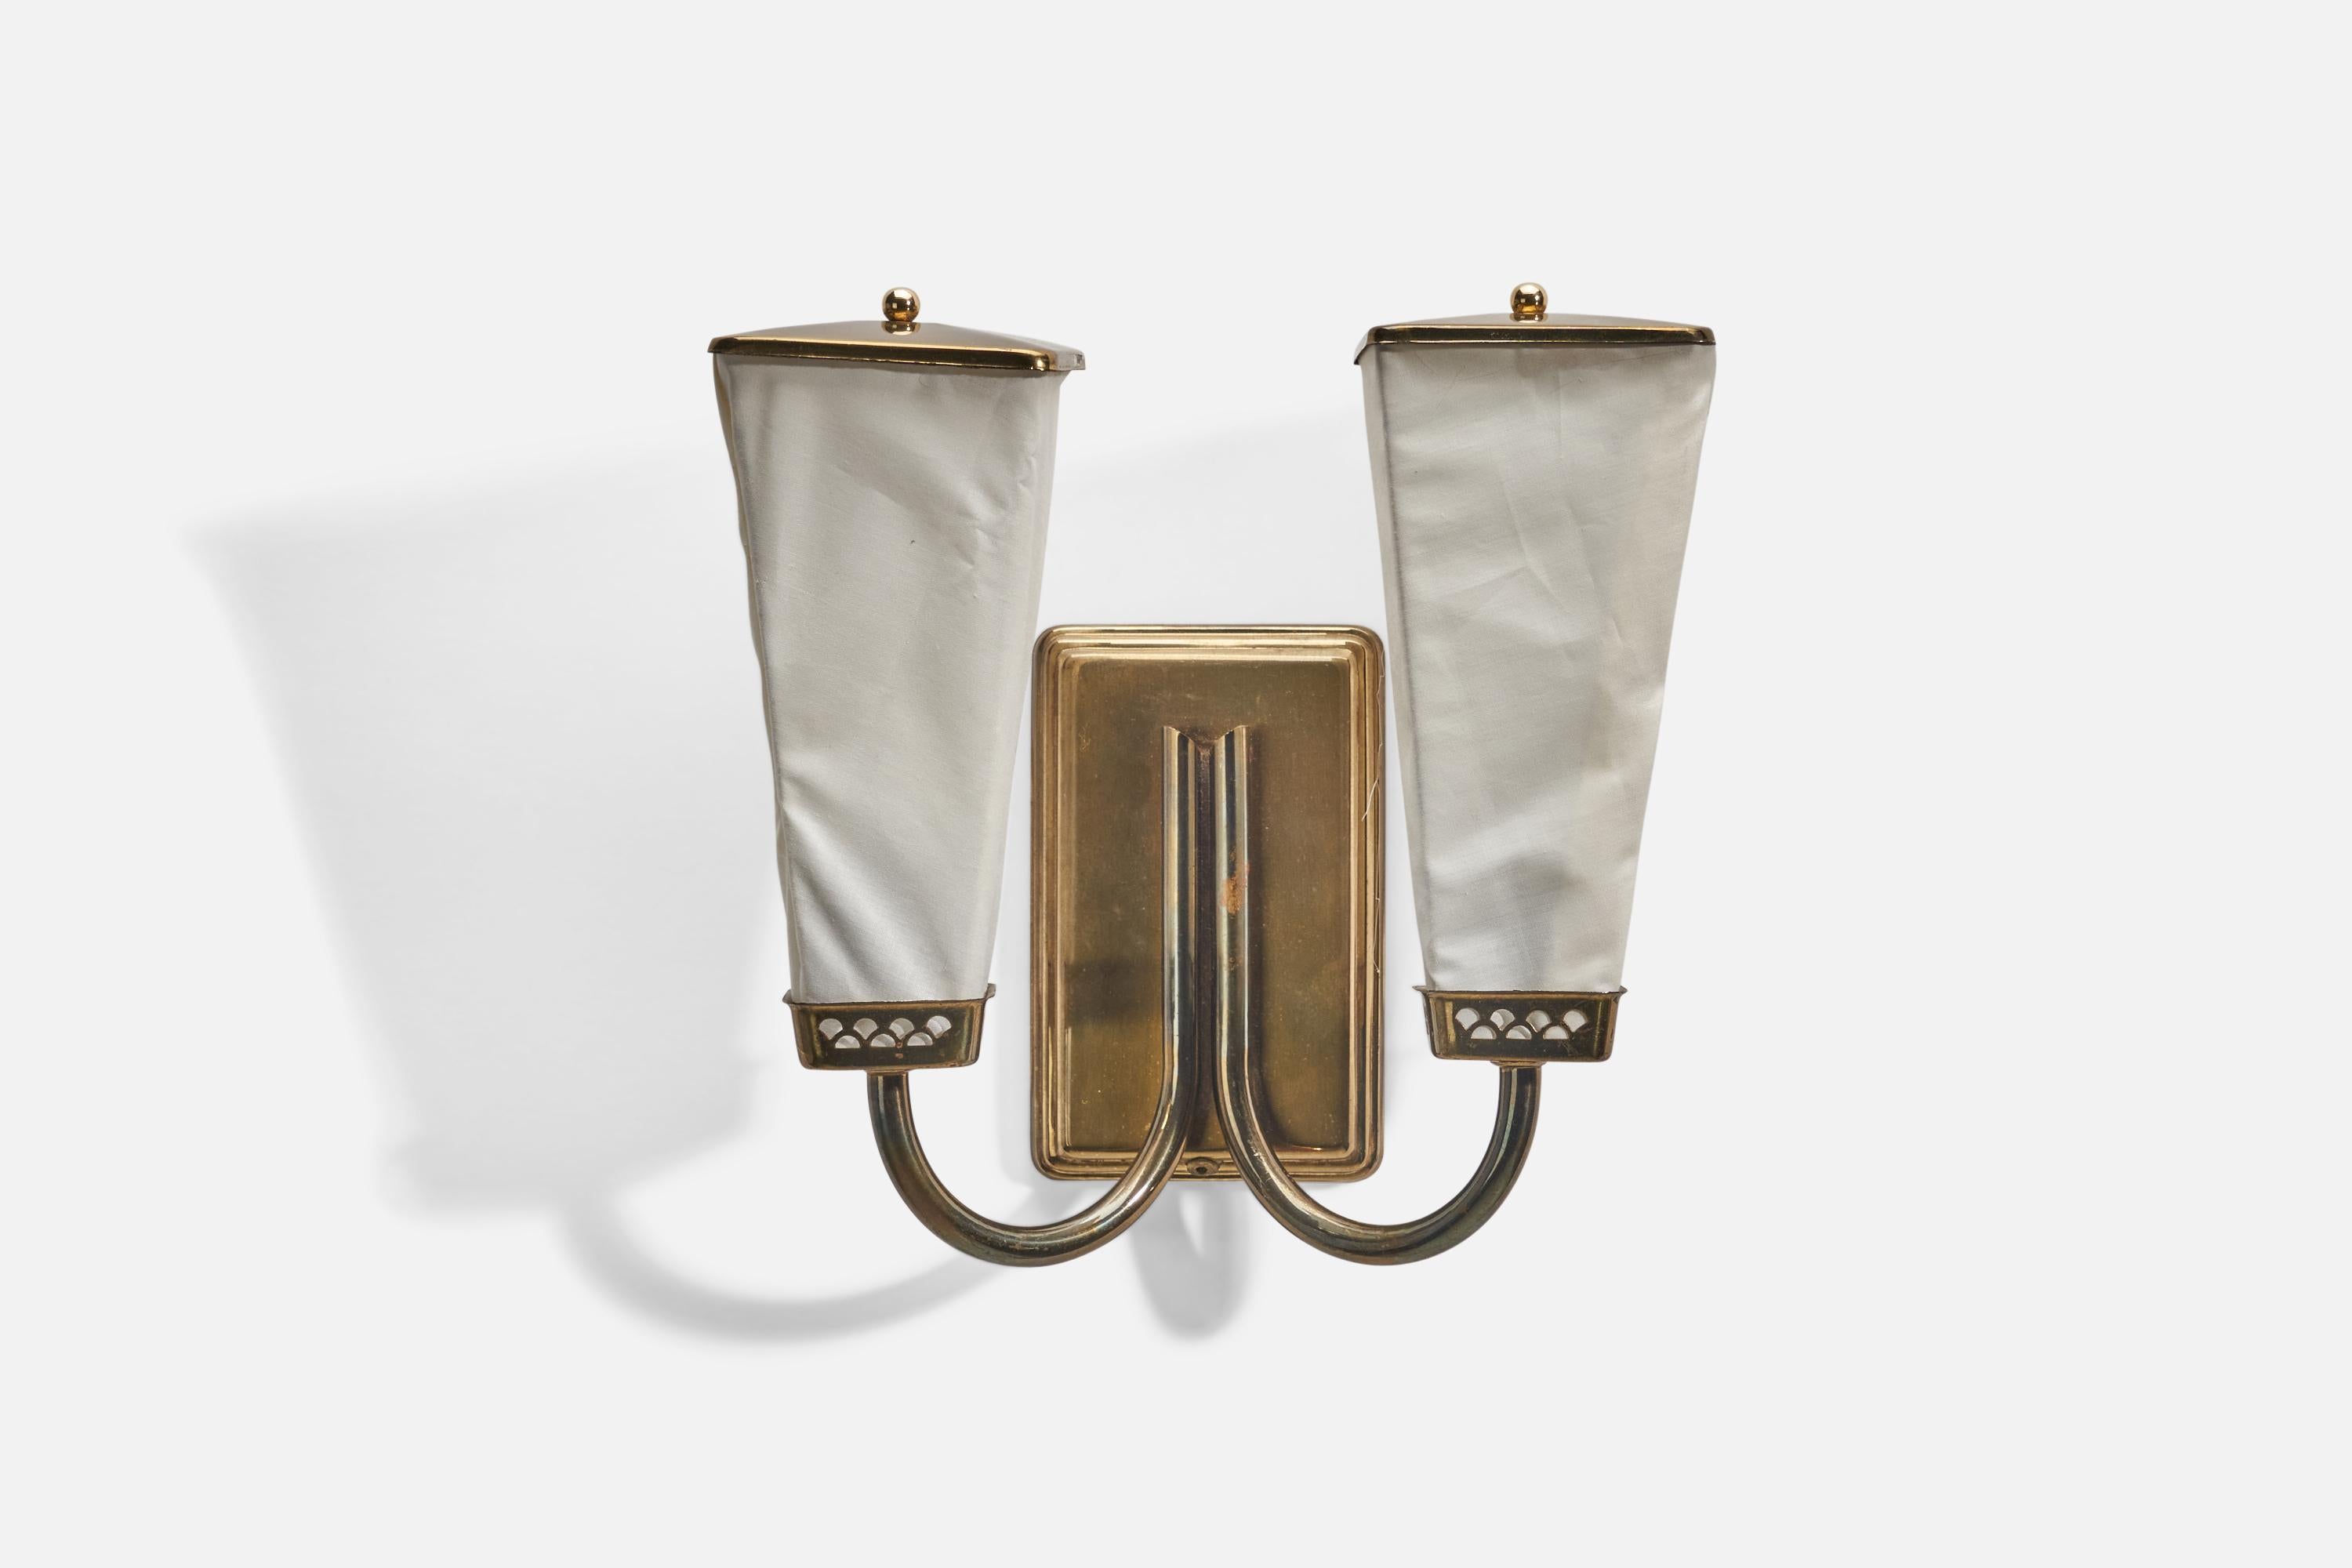 A pair of brass and fabric sconces designed and produced in Sweden, 1940s. 

Dimensions of Back Plate (inches) : 5.20 x 3.31 x 0.58 (Height x Width x Depth)

Sockets take E-14 bulbs.

There is no maximum wattage stated on the fixtures.